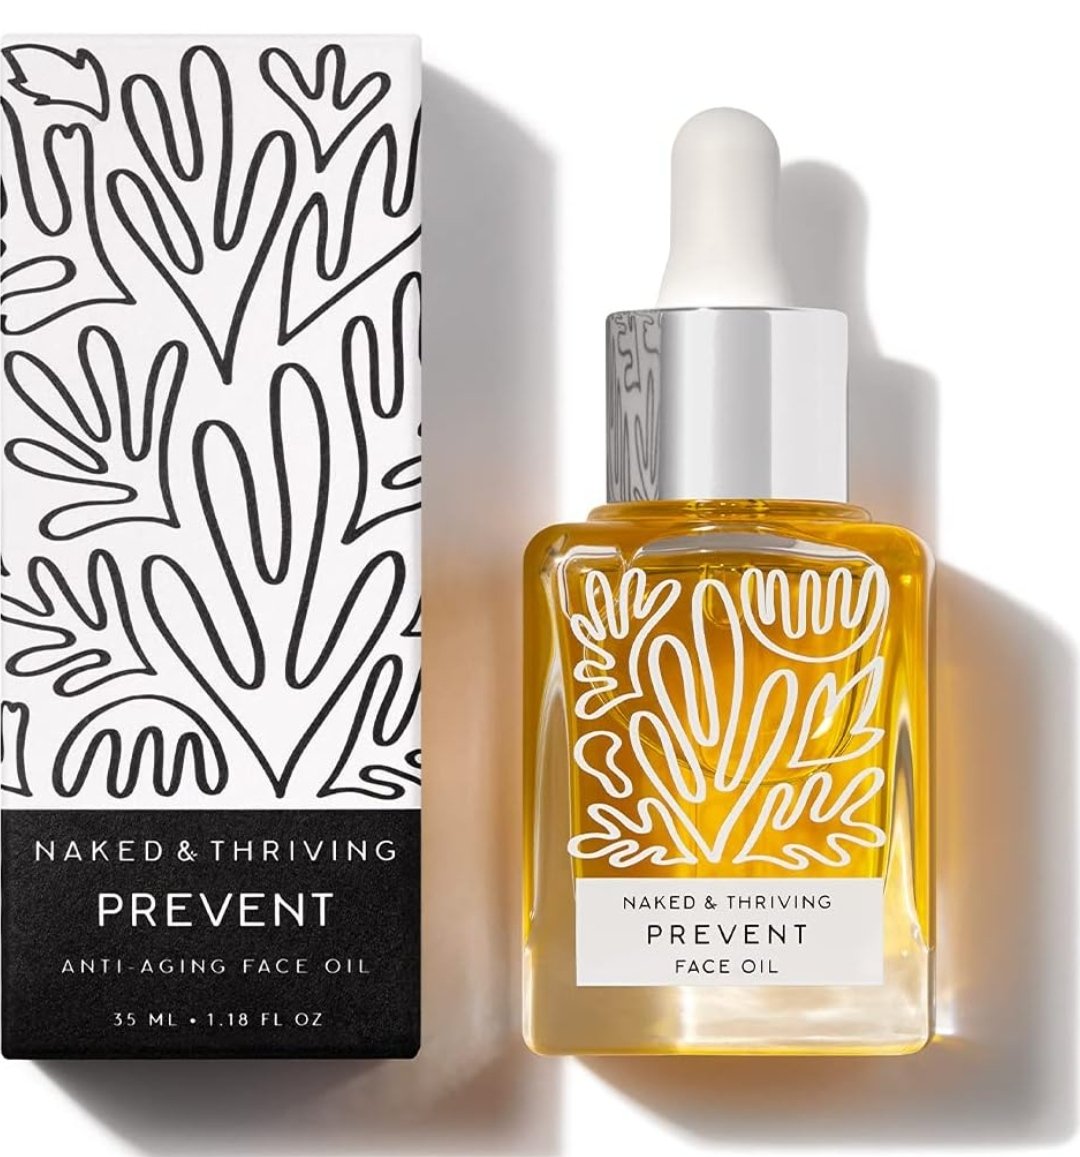 The Beauty Secret: Naked and Thriving Renew Serum